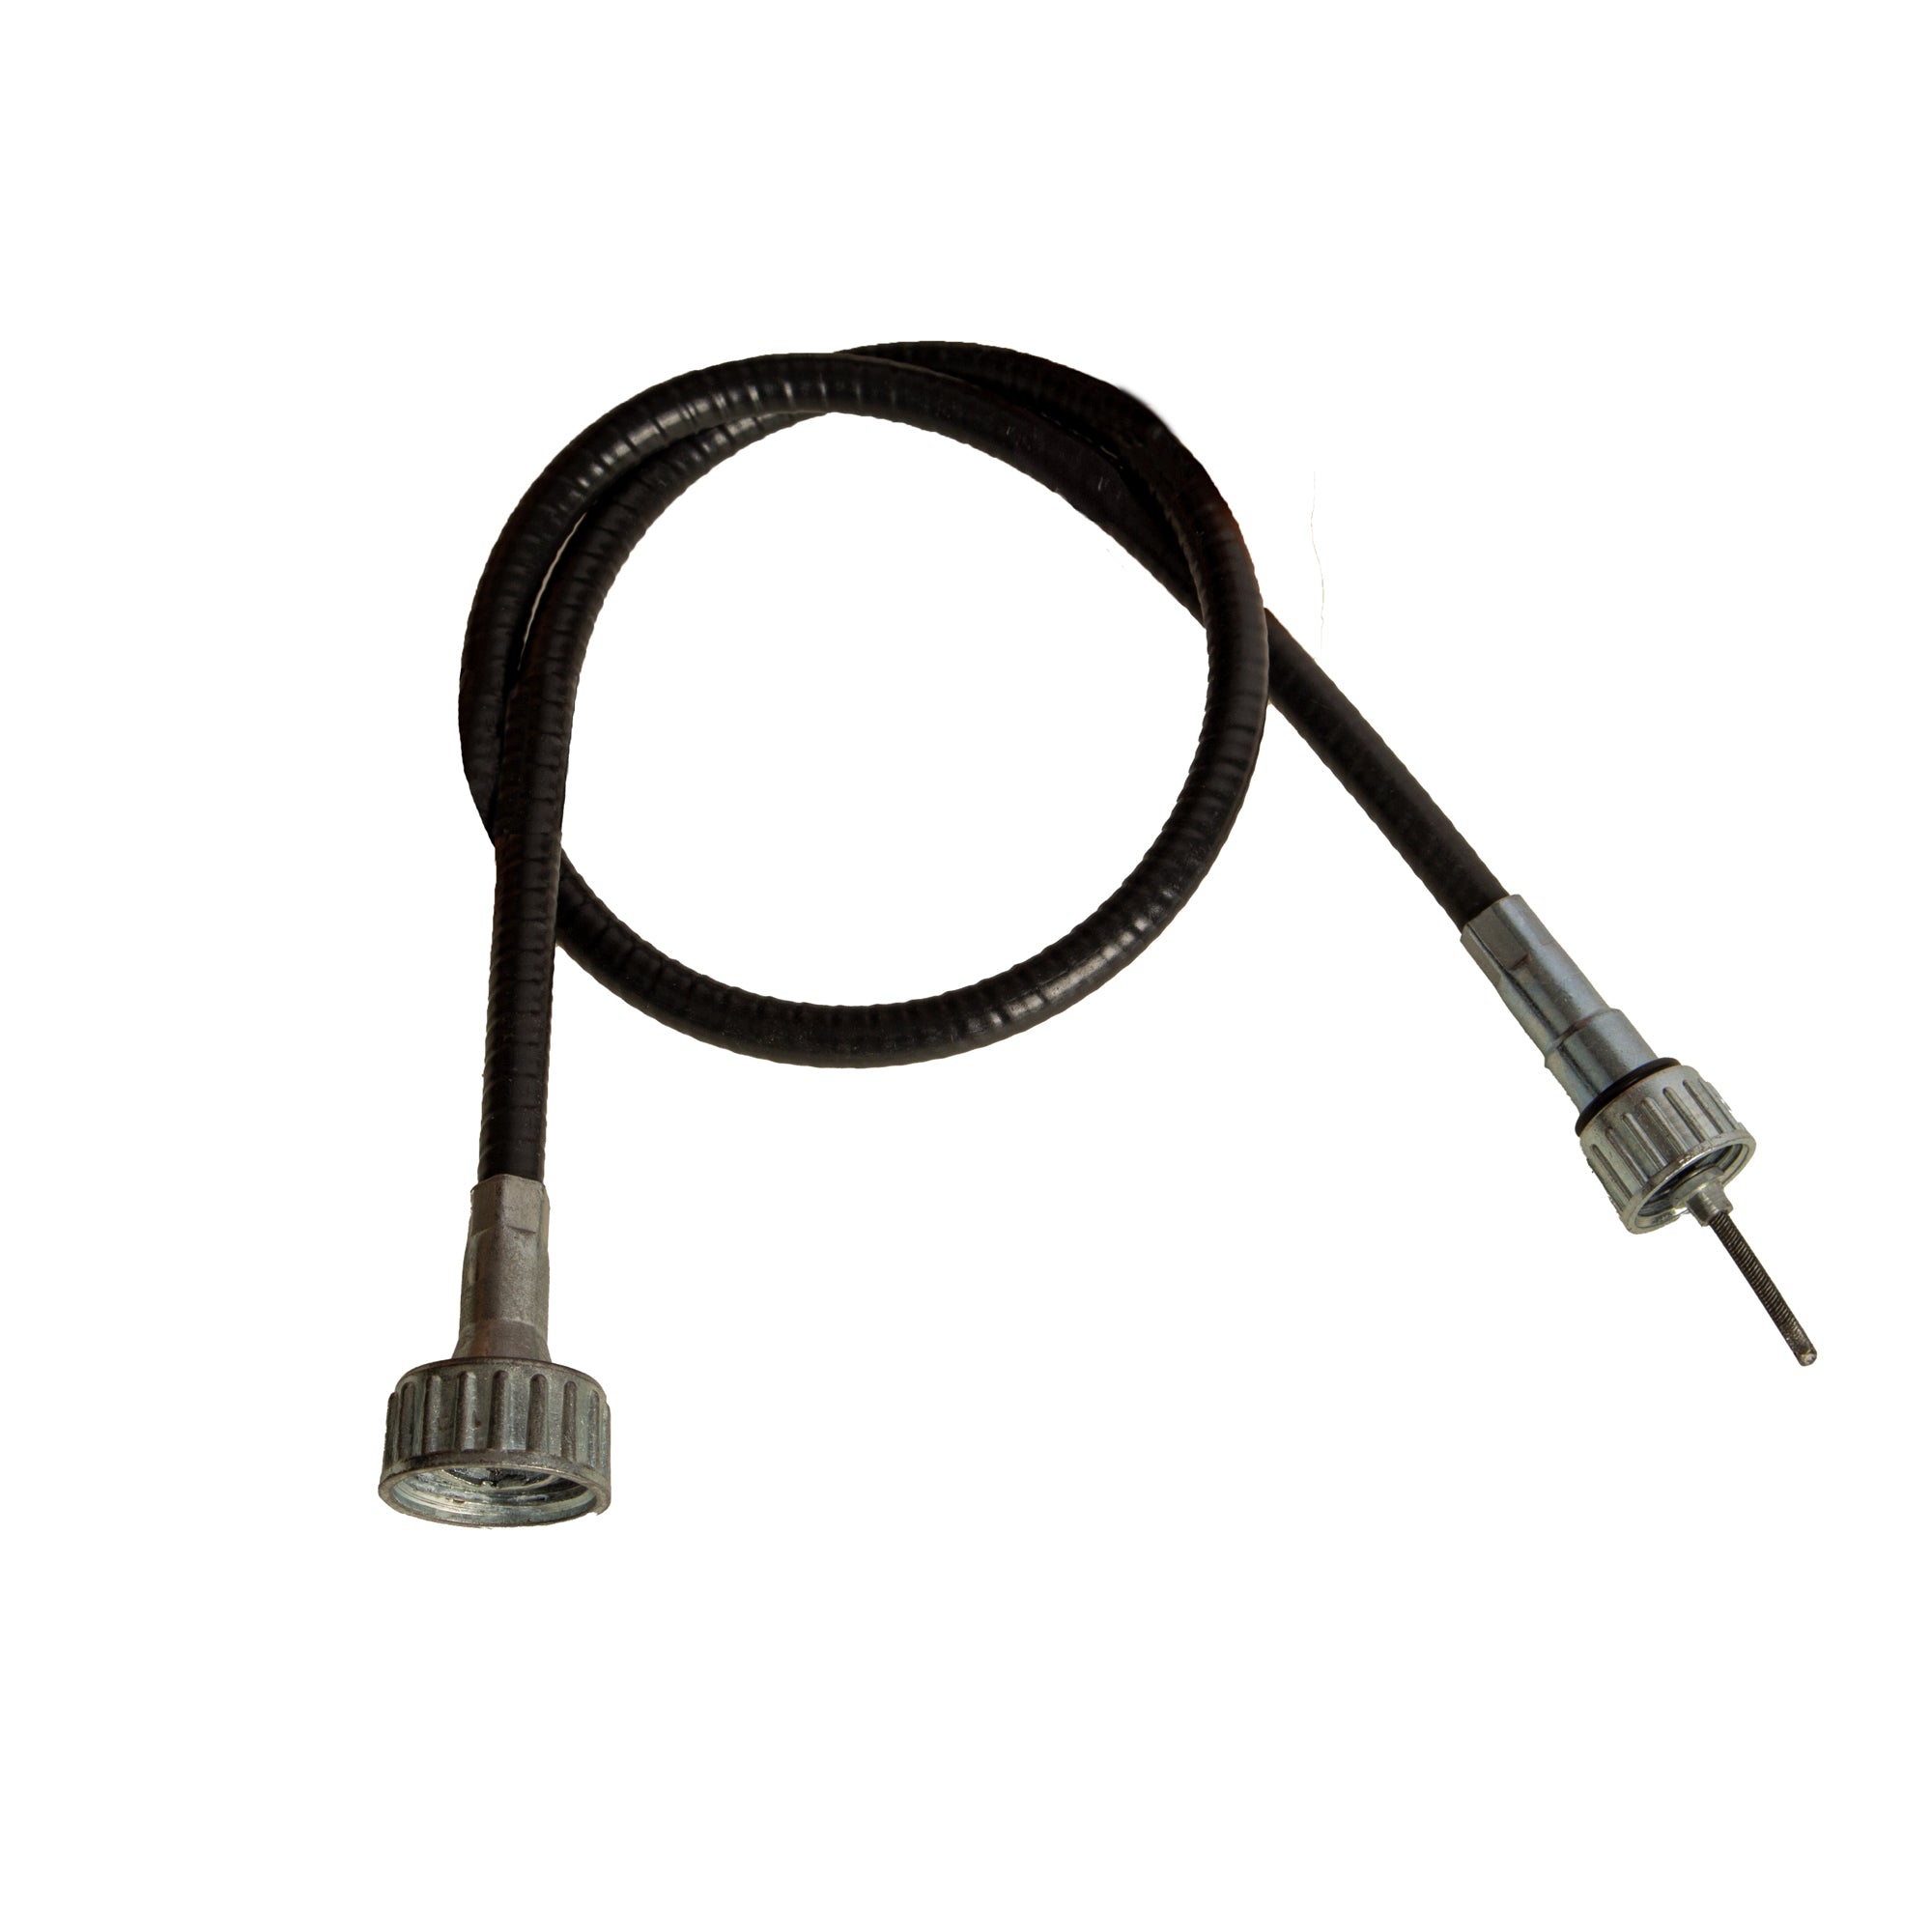 Tachometer Cable Replacement for MASSEY FERGUSON 231 240 250 255 1699381M92